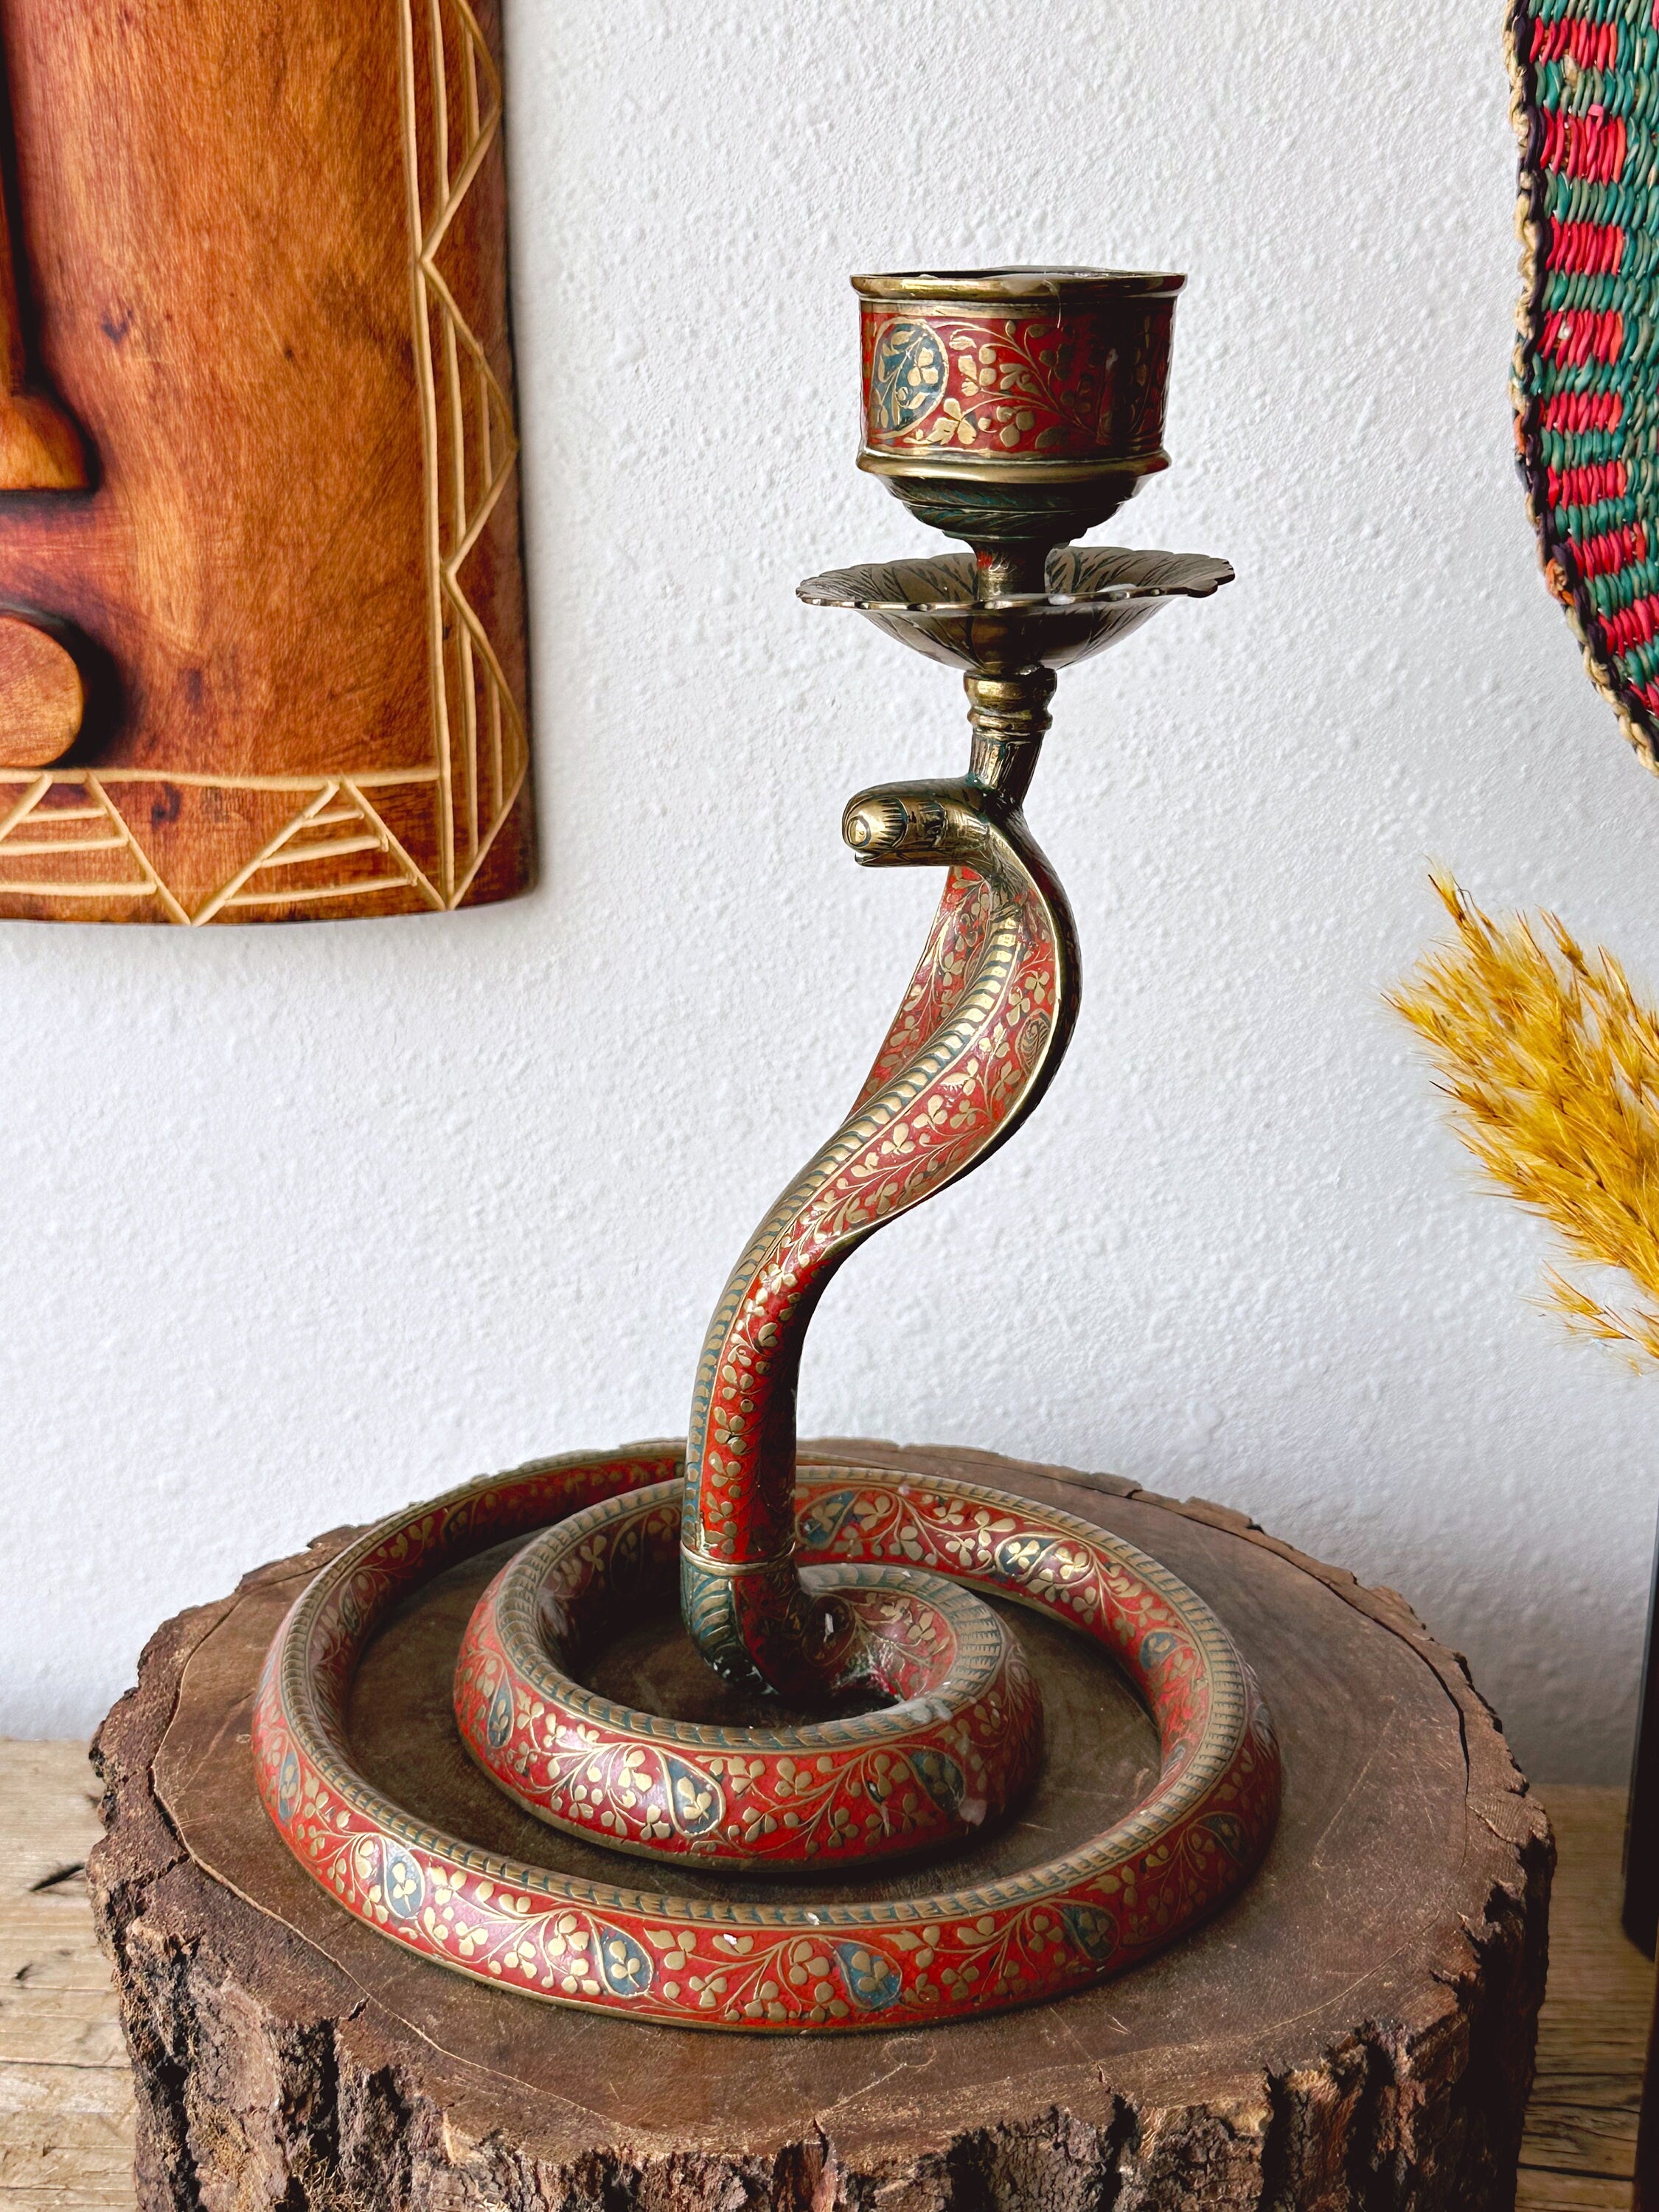 Vintage Brass Hand Painted Enameled Cobra Snake Tea Light Candle Holder | Engraved Serpent with Swirling Tail | Unique Boho Home Decor